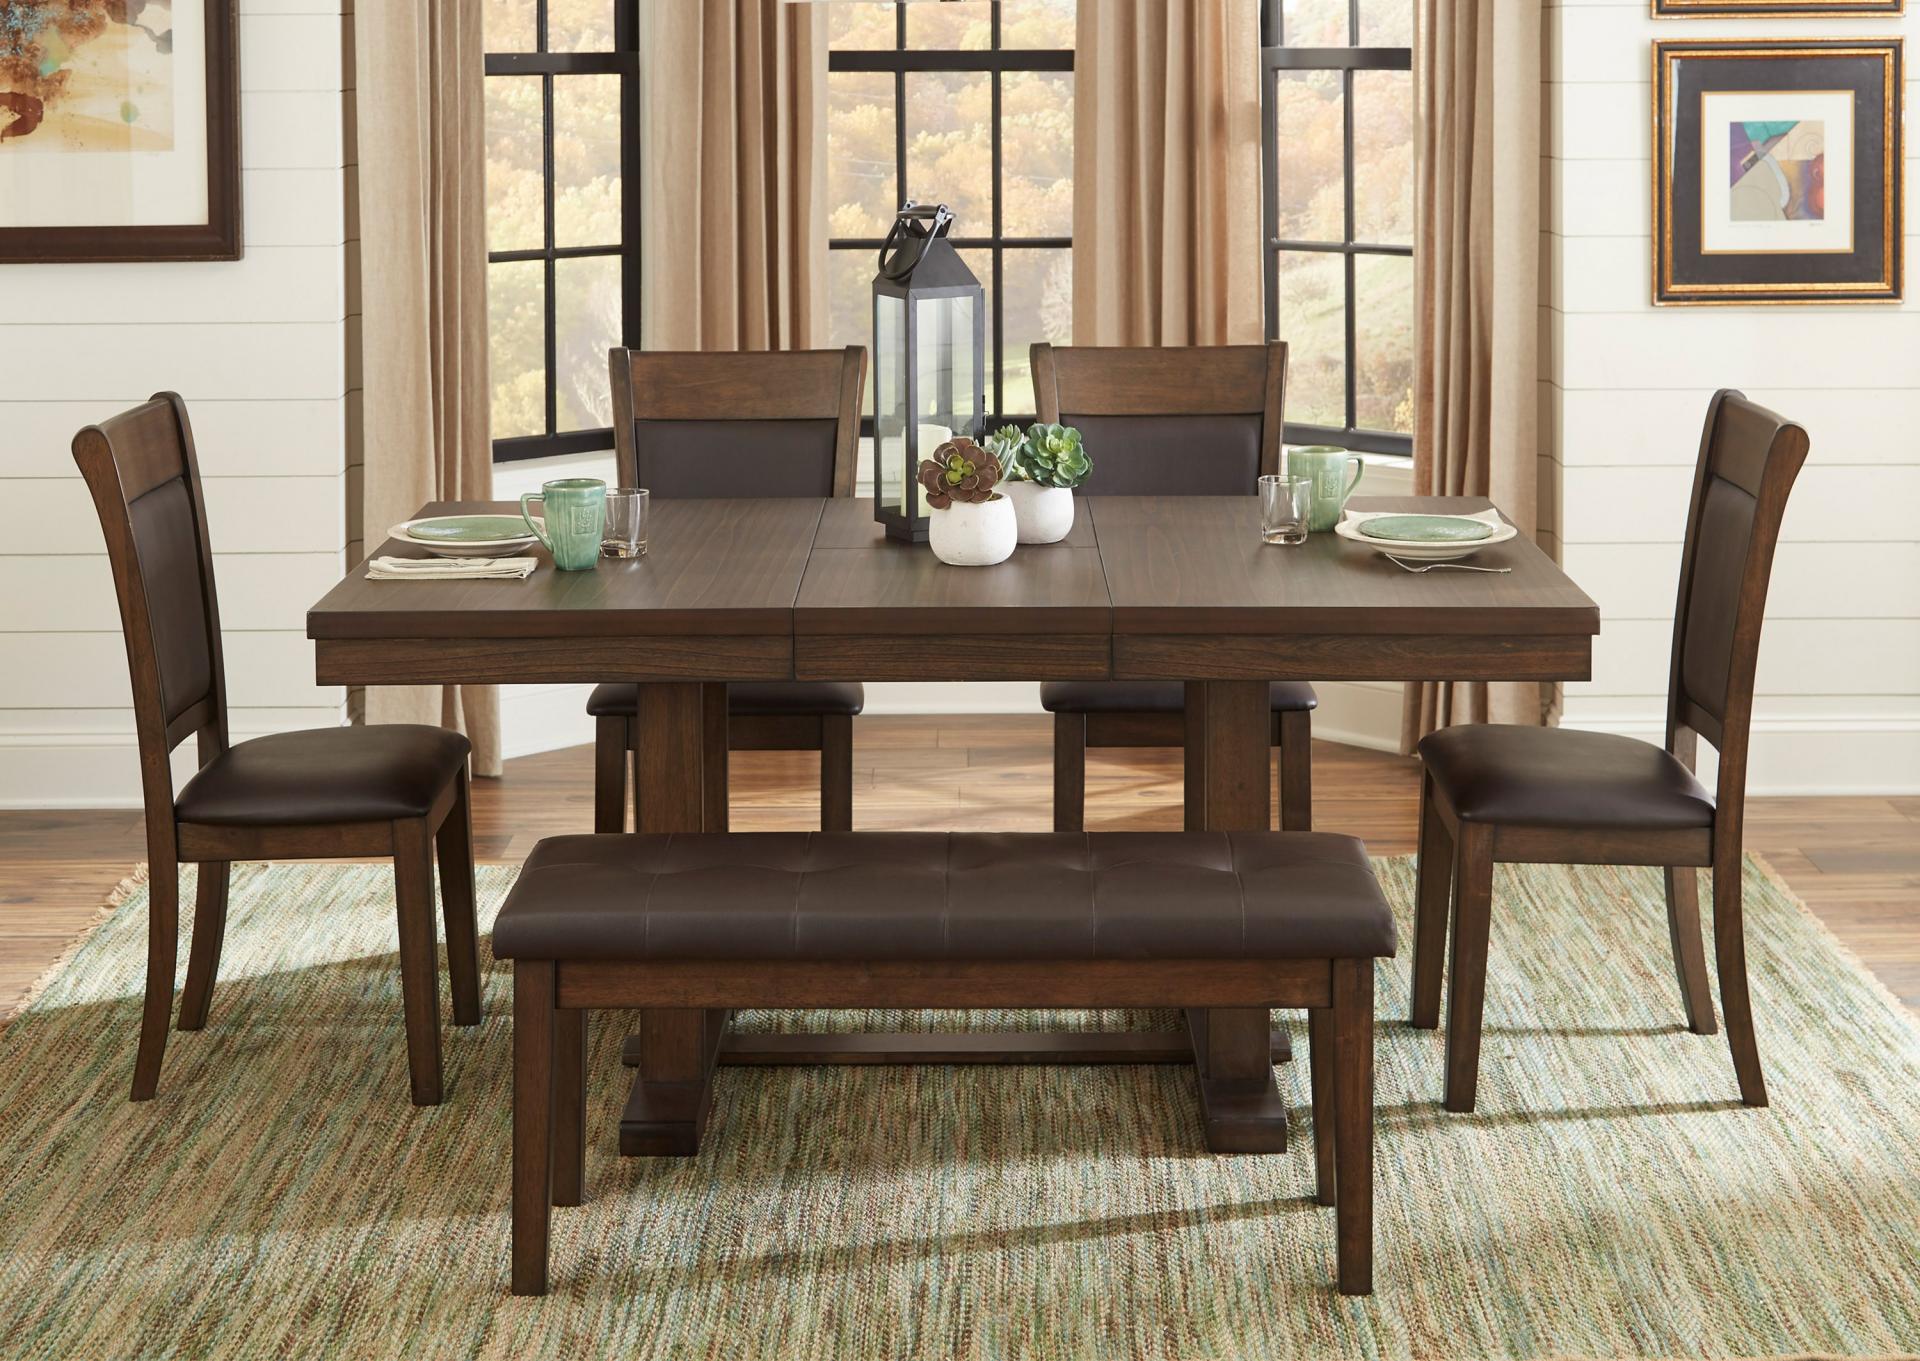 Wieland Table w/B.Fly Leaf 5pc Dining Set,Homelegance Dining Sets